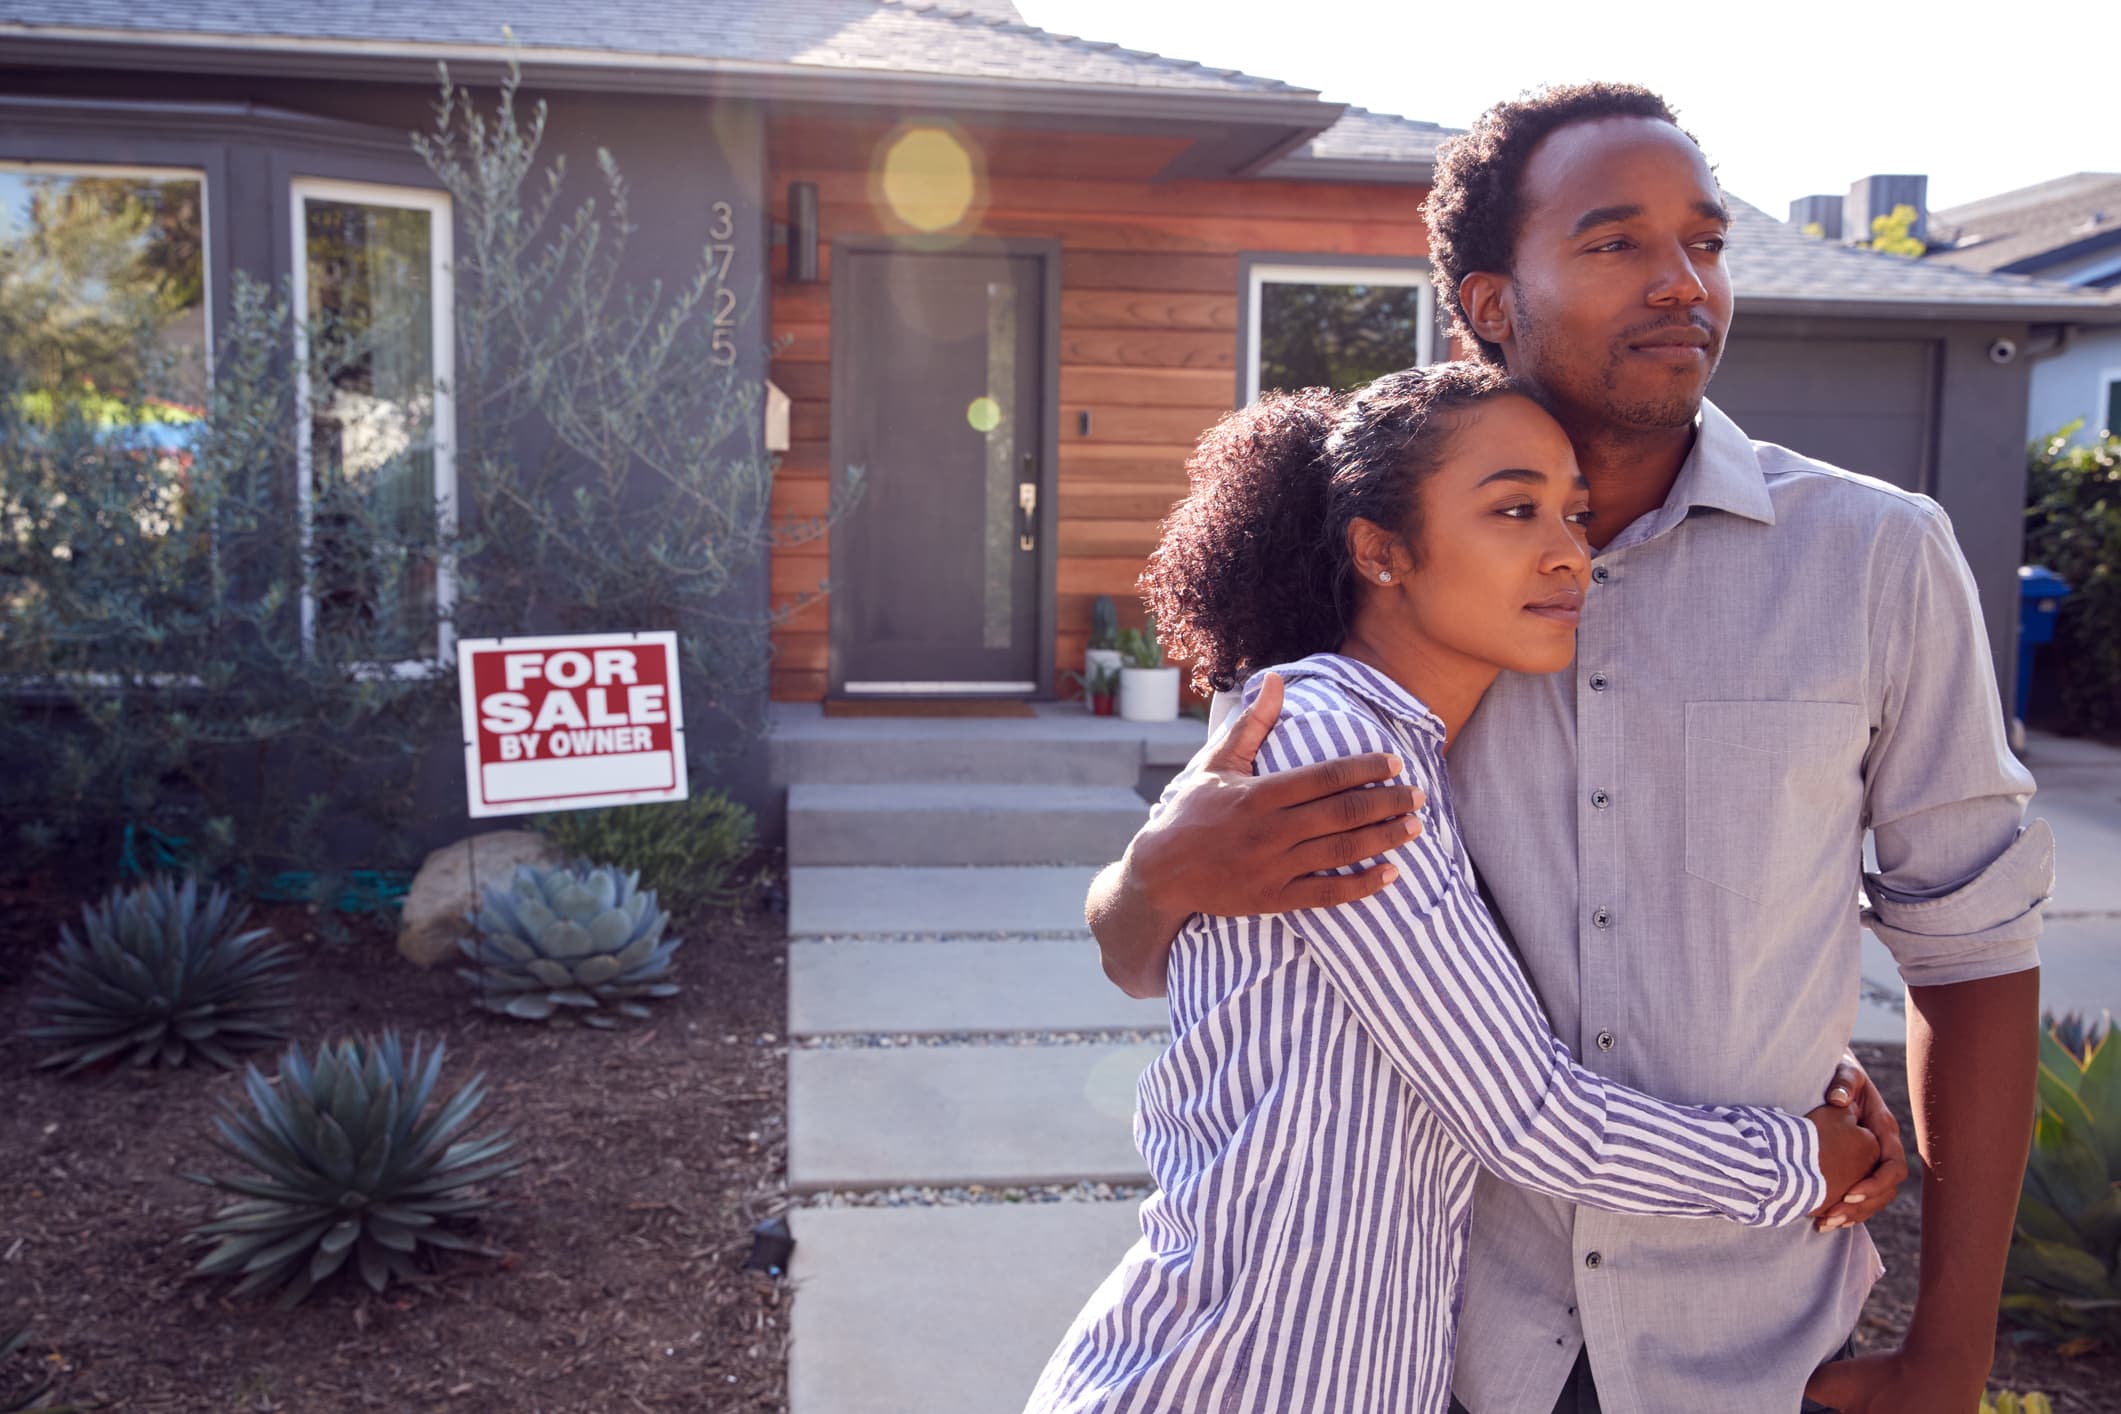 Before rushing into the hot housing market, here’s how to set yourself up for success